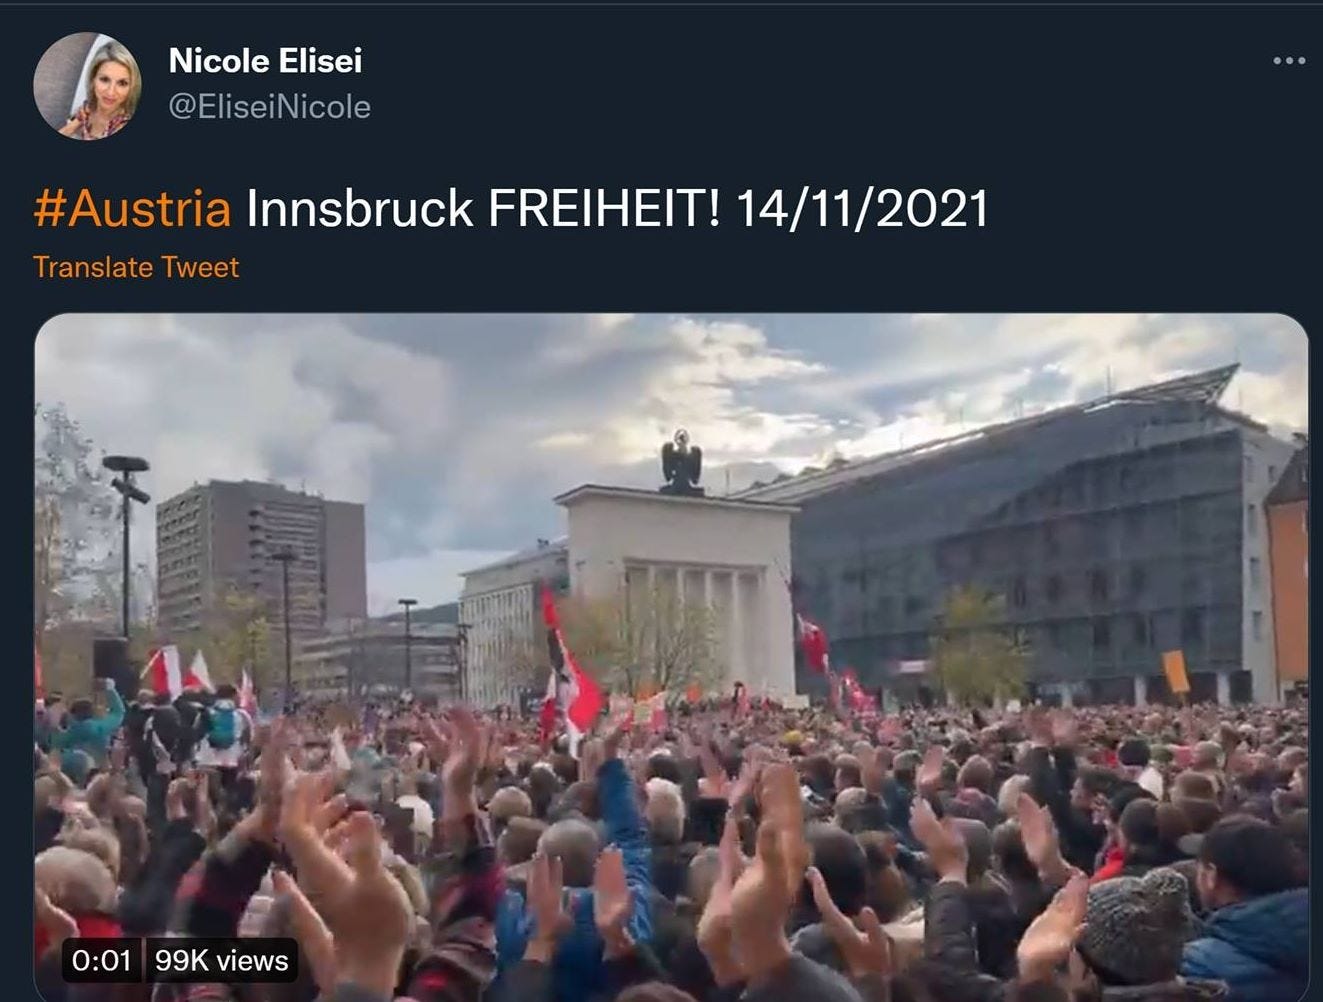 May be an image of 1 person, standing, outdoors and text that says 'Nicole Elisei @EliseiNicole #Austria Innsbruck FREIHEIT! 14/11/ 2021 Translate Tweet 0:01 99K views'